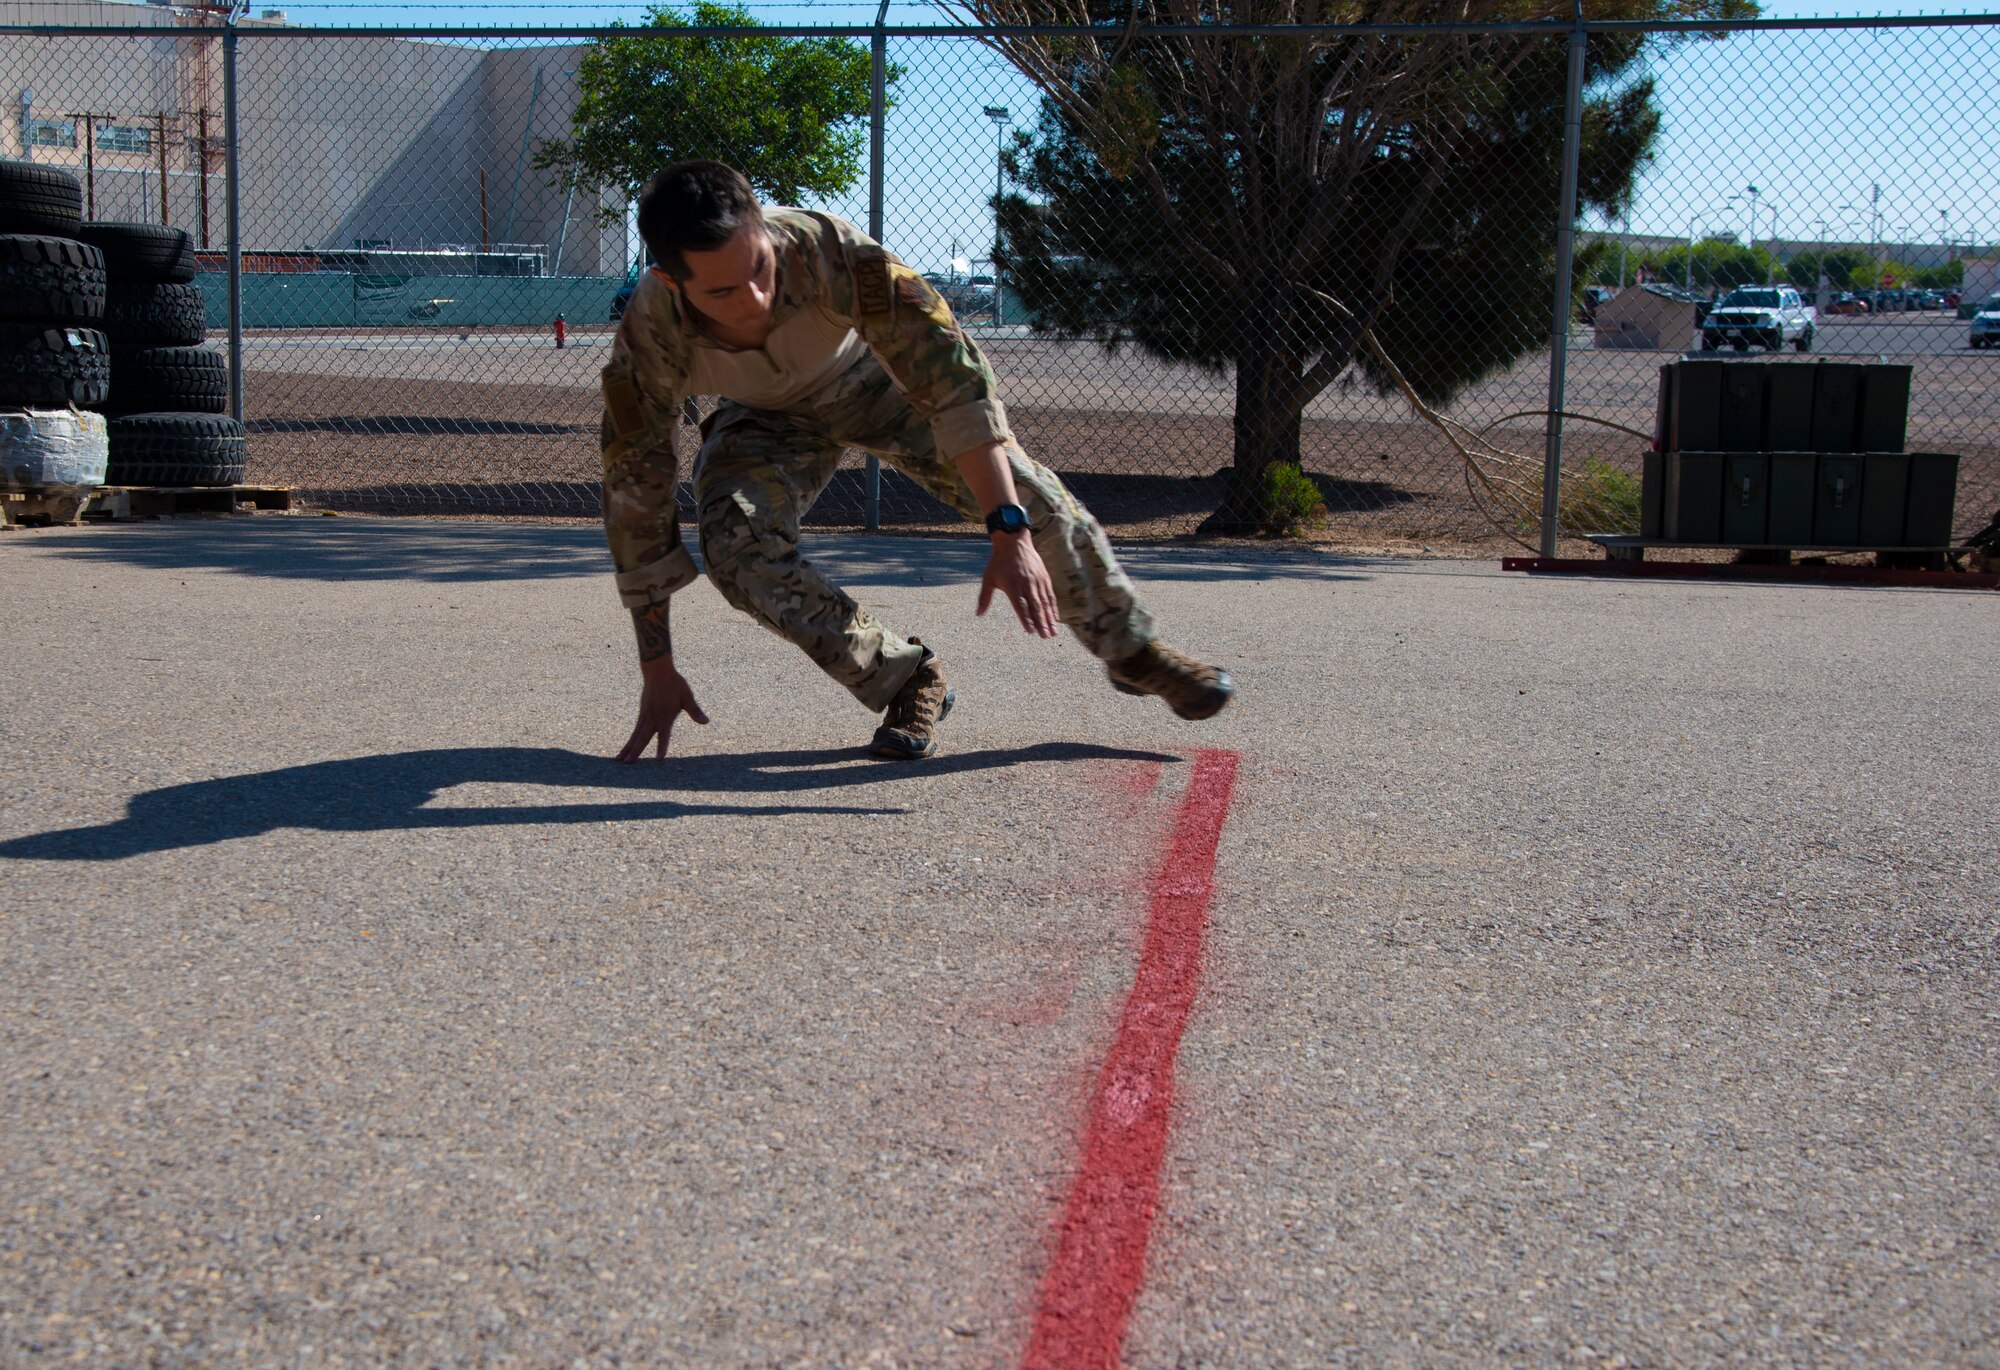 A U.S. Air Force Tactical Air Control Party specialist does an agility test during the 2021 Wraith Challenge, April 19, 2021, on Fort Bliss, Texas. The first day of the Wraith Challenge started with a physical test, which includes a three-mile ruck, standing long jumps, an agility test, sprints, farmer carries and a one-and-a-half-mile run. (U.S. Air Force photo by Airman 1st Class Jessica Sanchez)